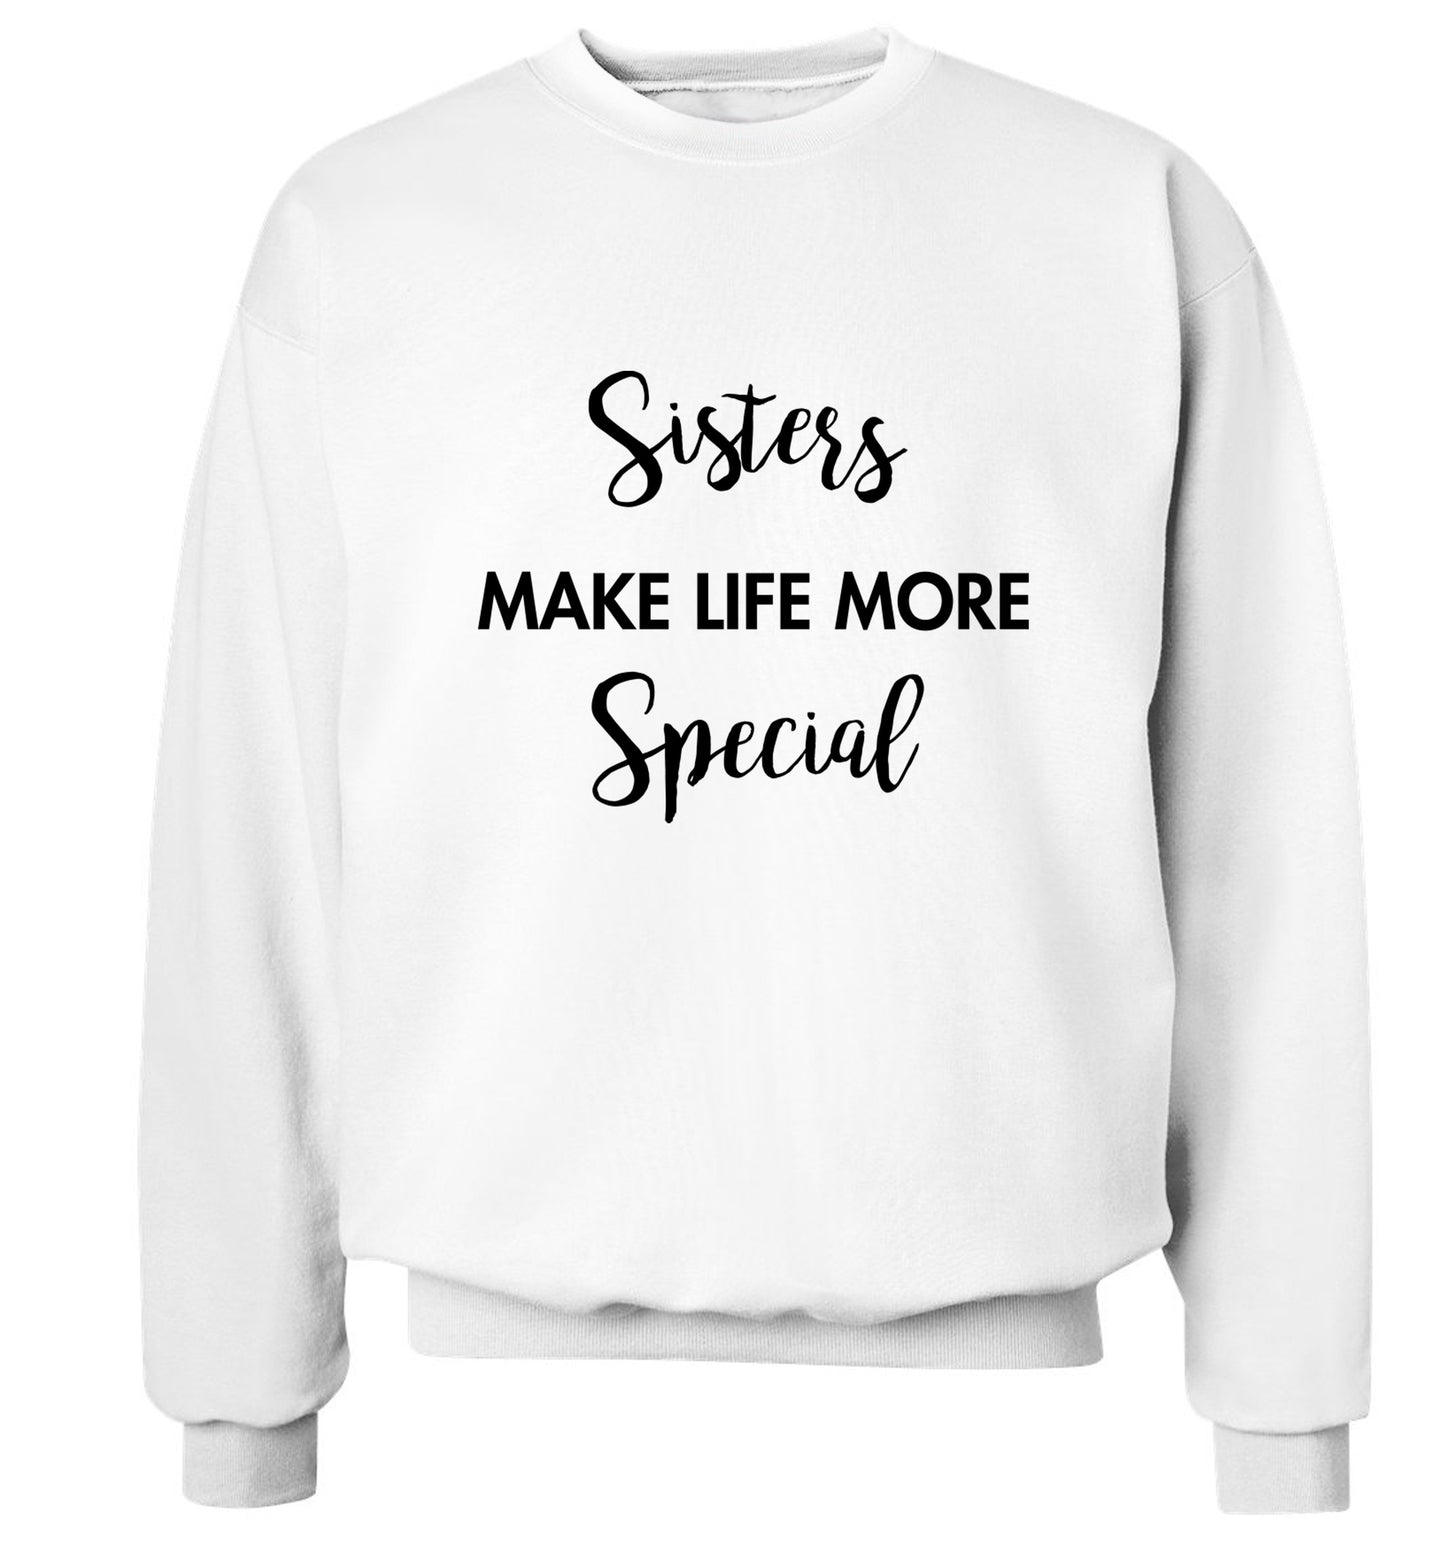 Sisters make life more special Adult's unisex white Sweater 2XL